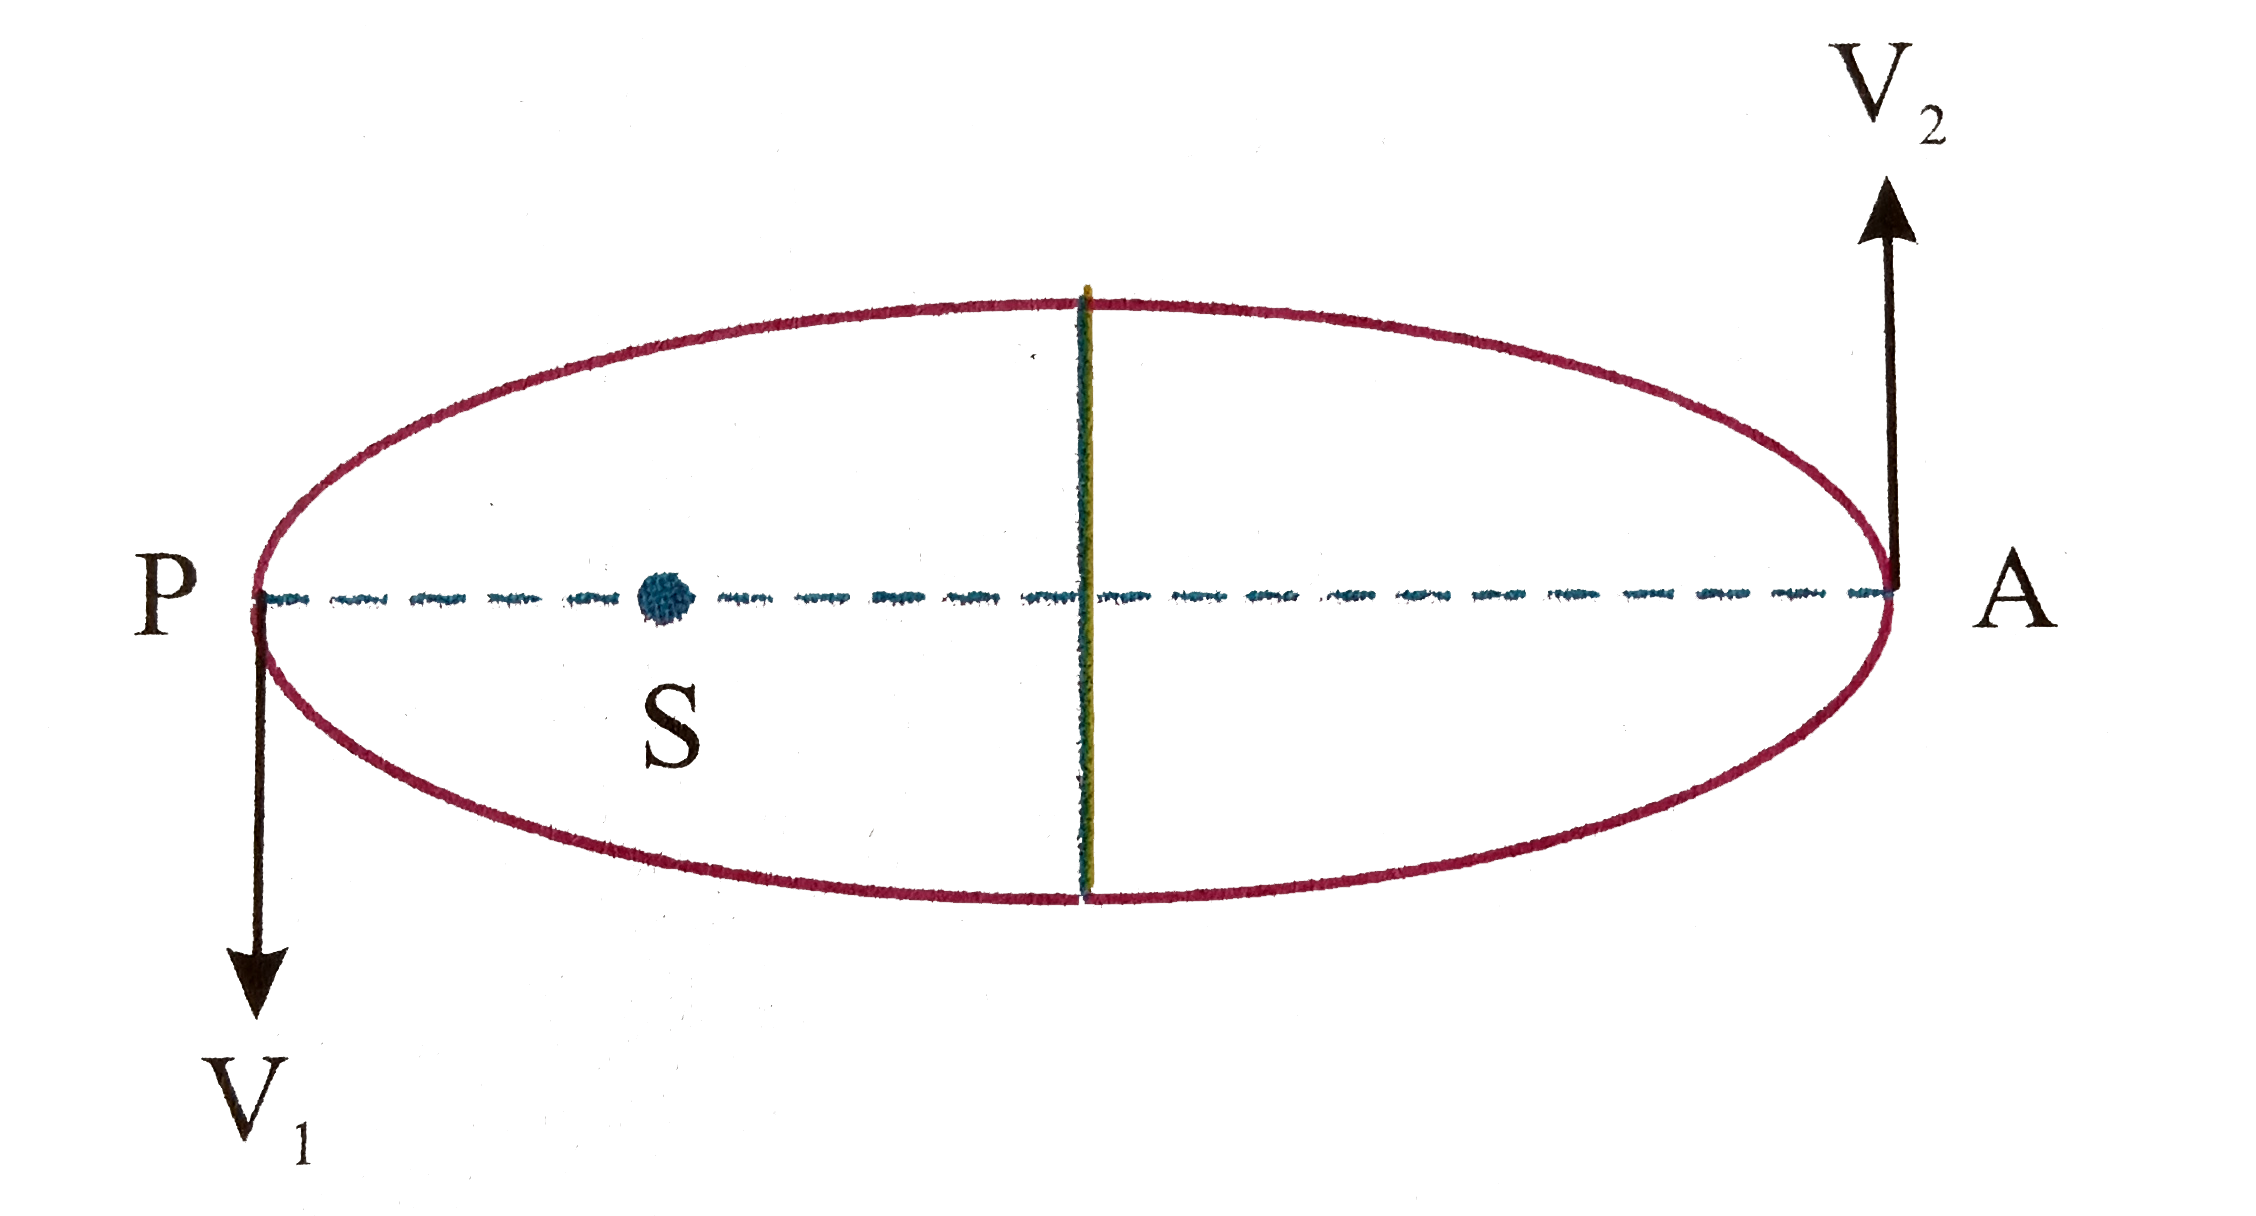 A planet of mass m is moving in an elliptical orbit around the sun of mass M. The semi major axis of its orbit is a, eccentricity is e.  Find total energy of planet interms of given parameters.